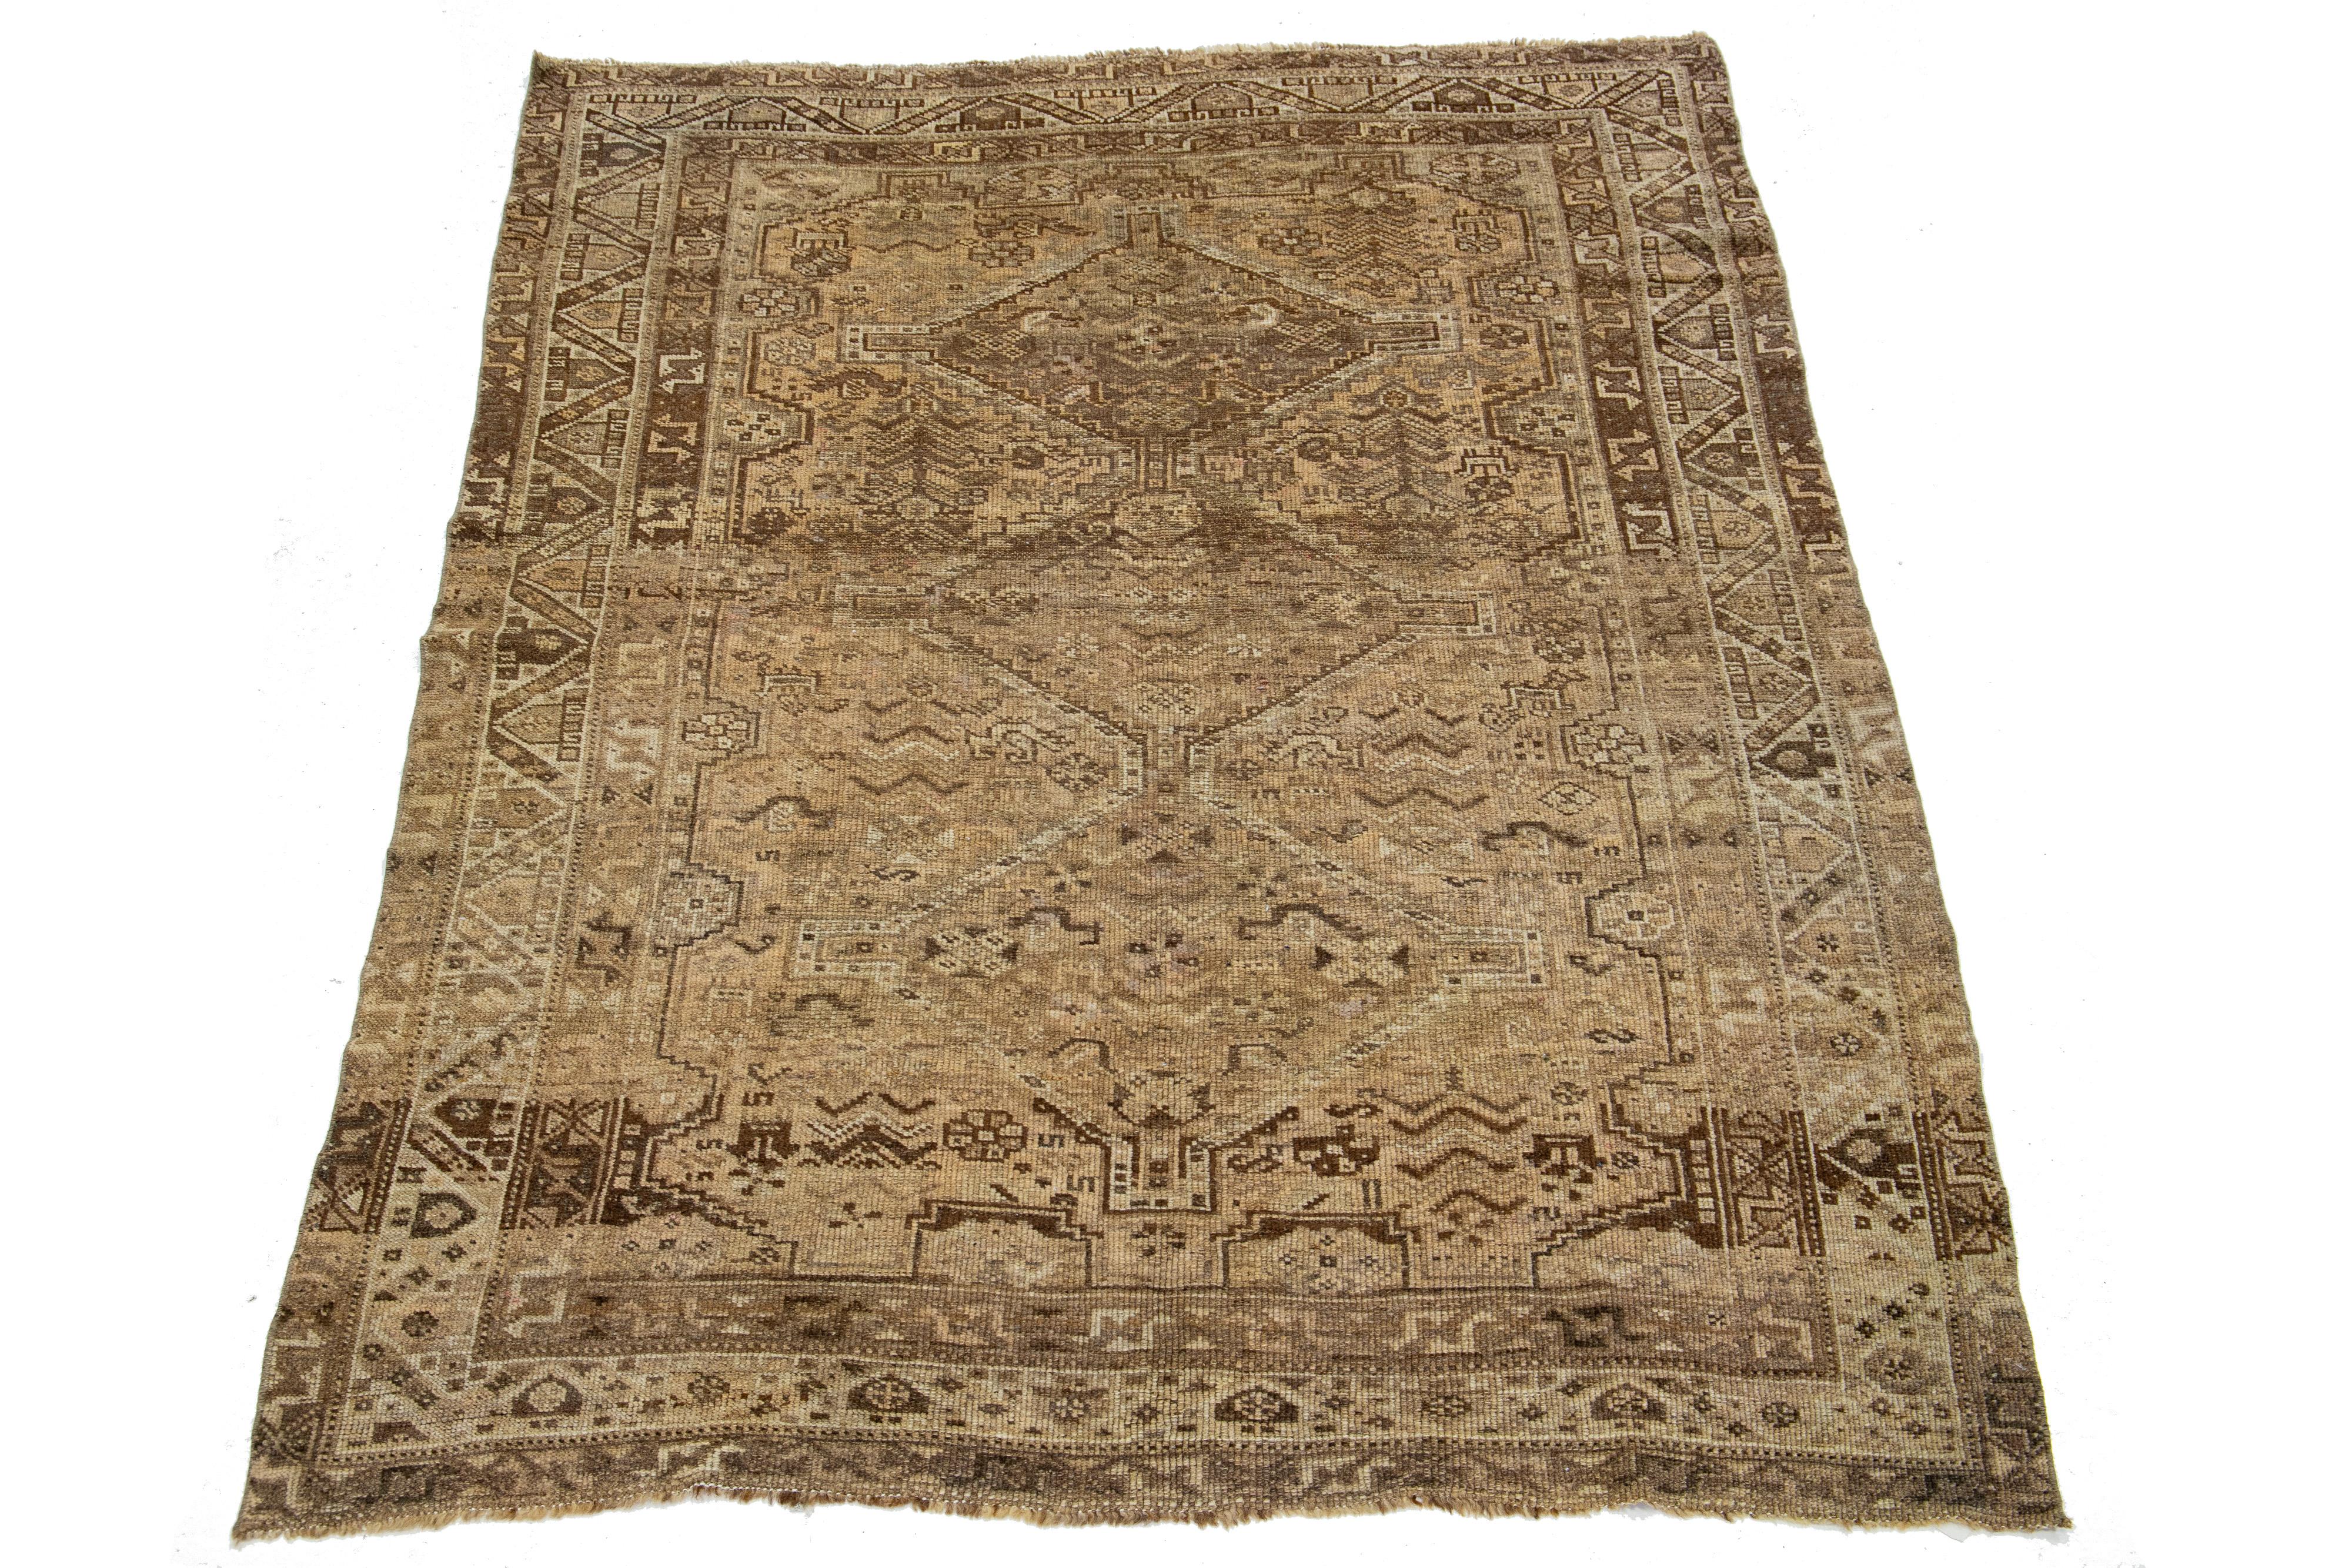 This Persian Shiraz wool rug showcases an exquisite traditional floral medallion design with striking beige and pink accents against a tan background. 

This rug measures 4'8